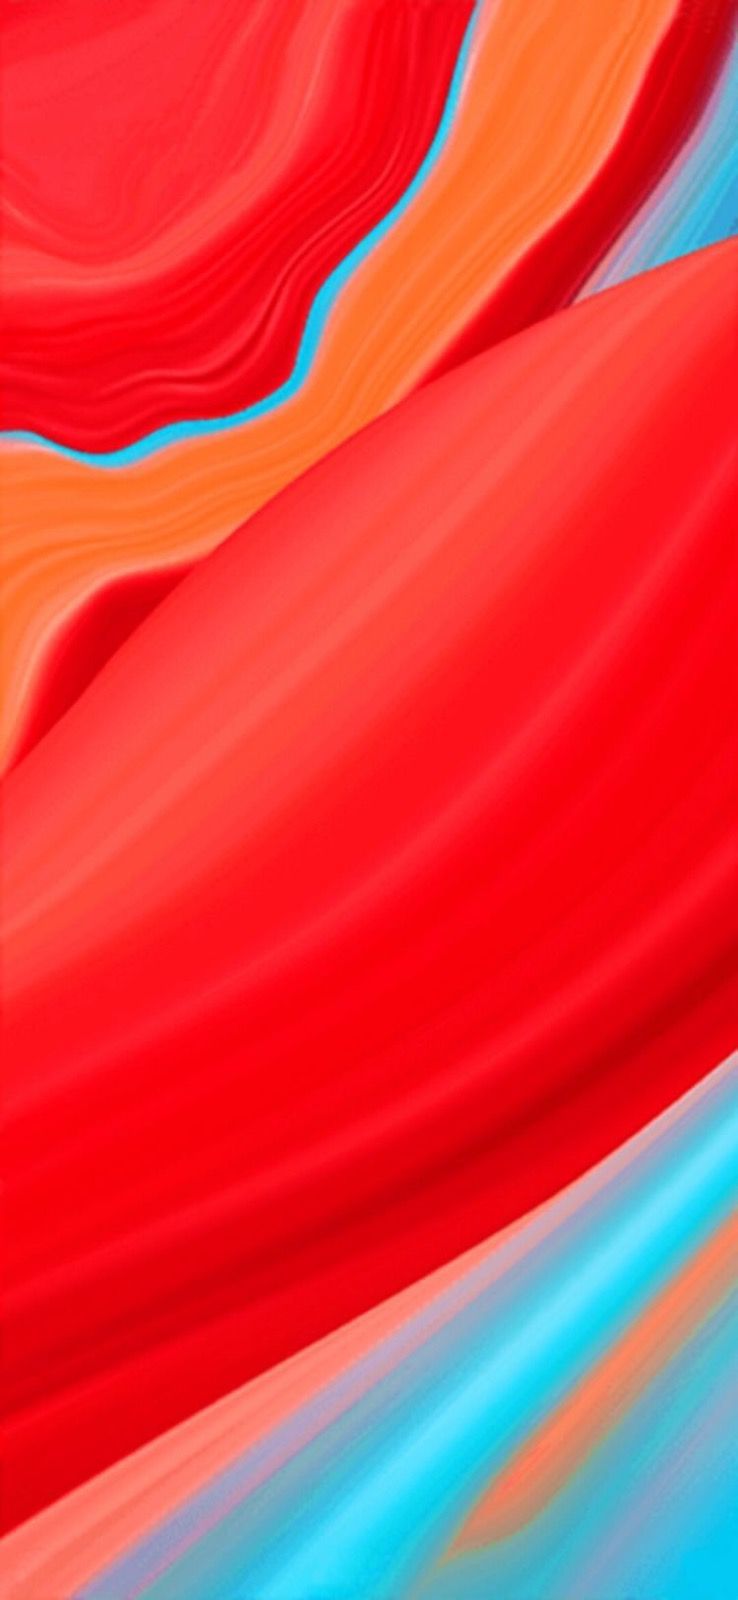 iPhone Wallpaper. Blue, Red, Orange, Pink, Textile, Electric blue